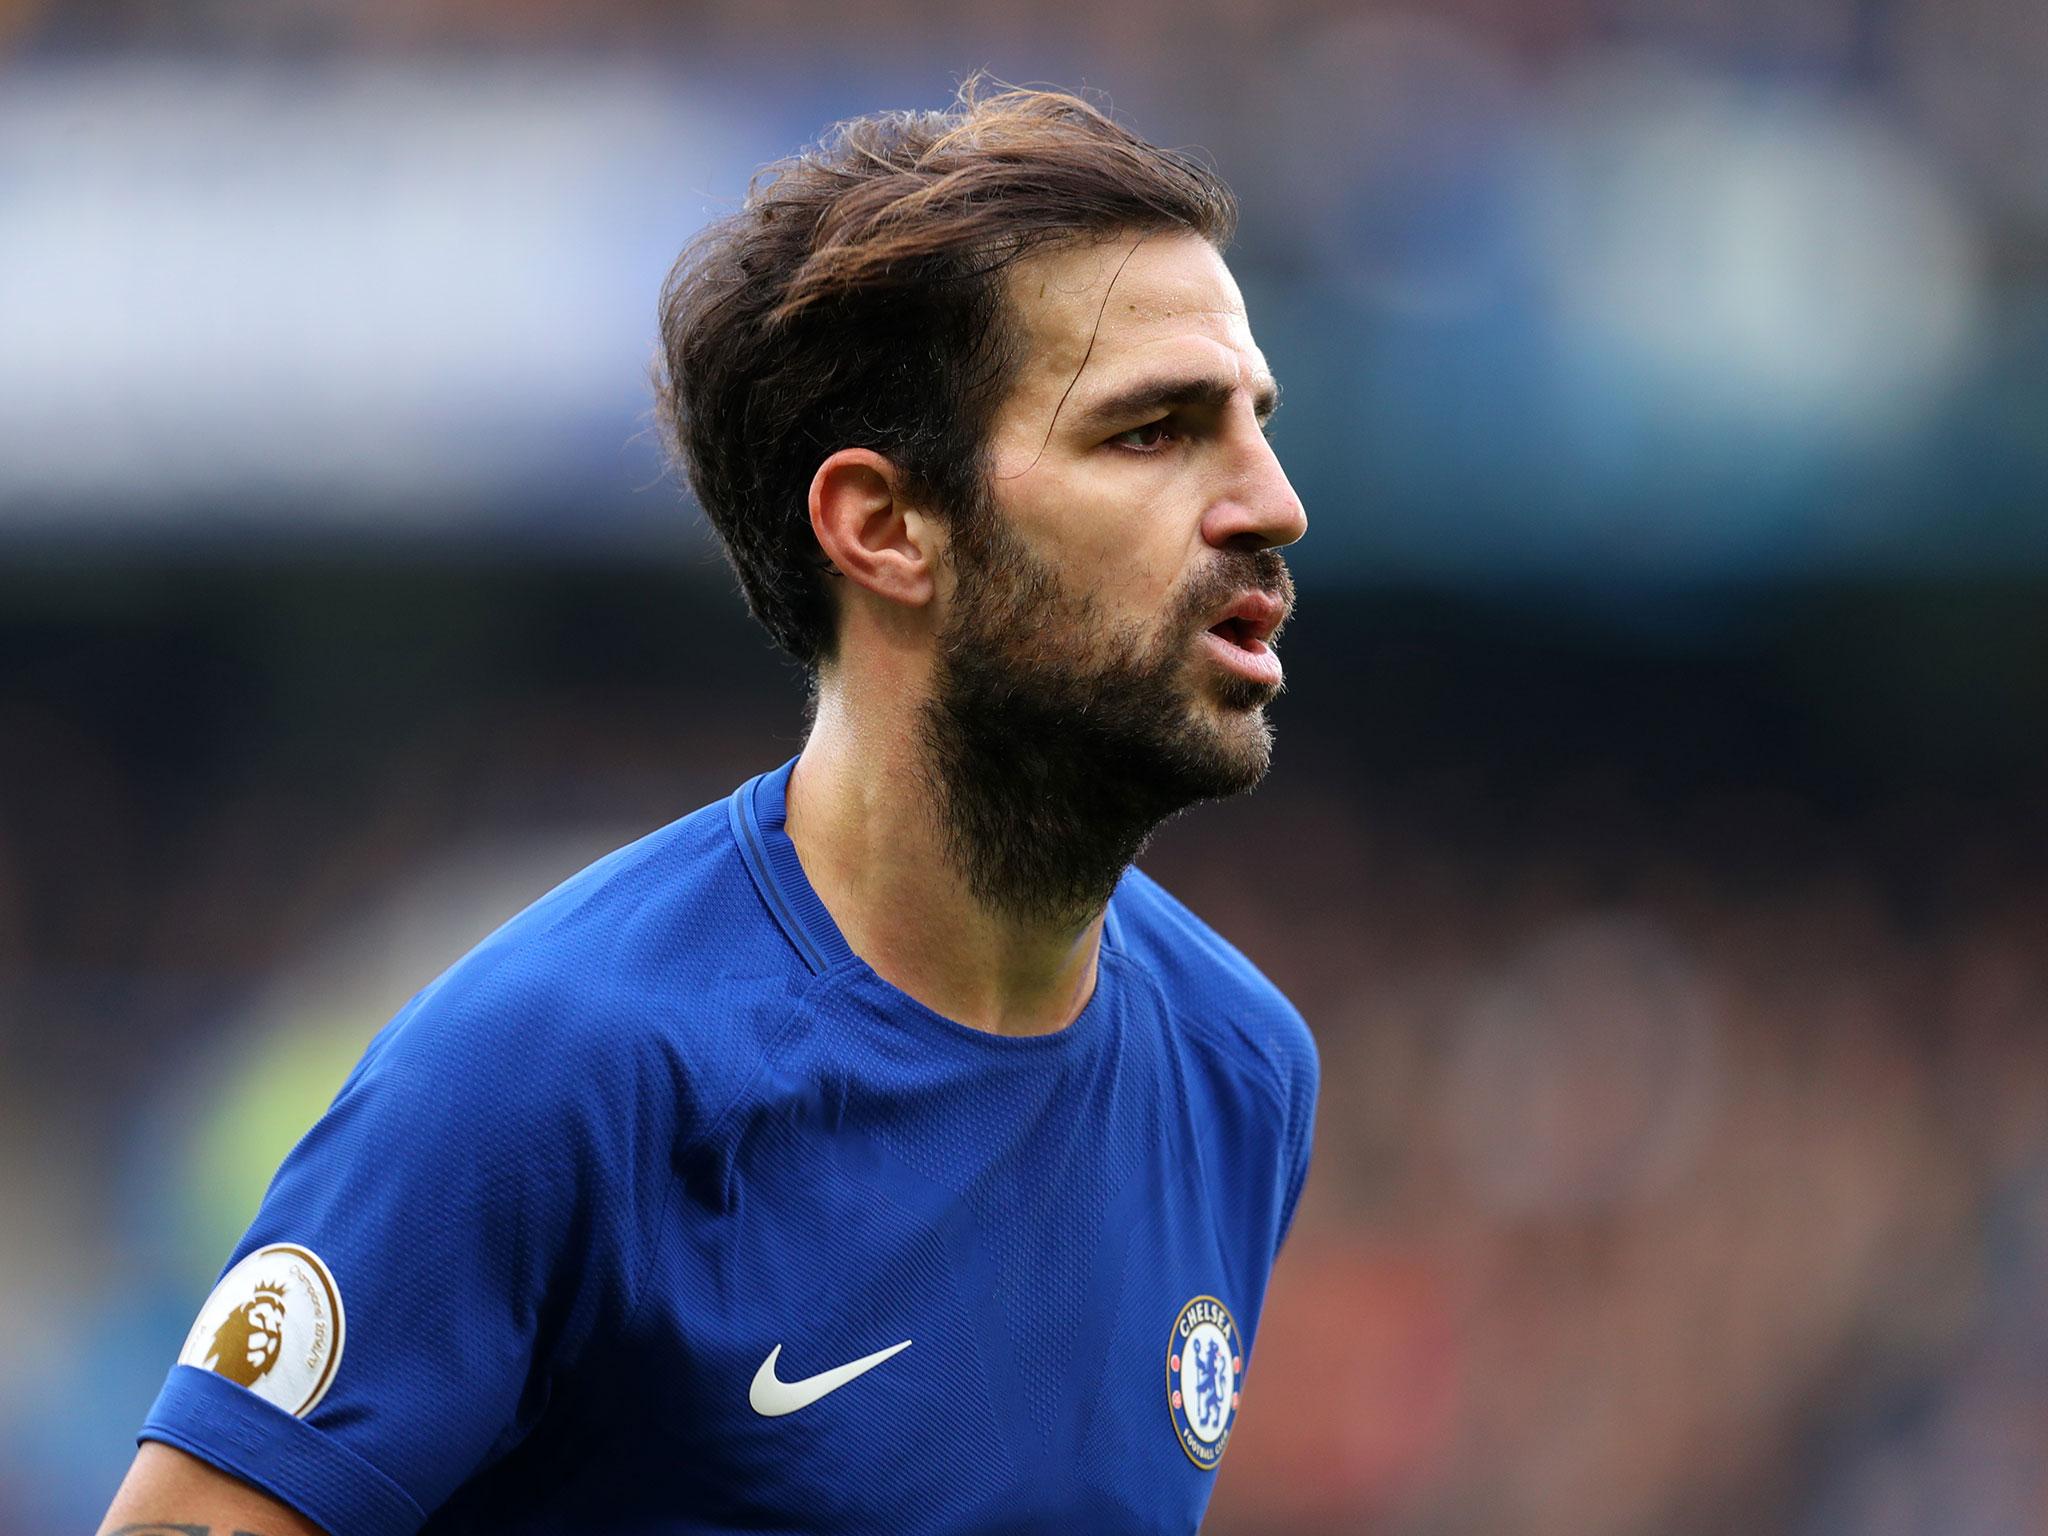 The 30-year-old is back in favour at Stamford Bridge and admits he was concerned for his future at the club at times last season